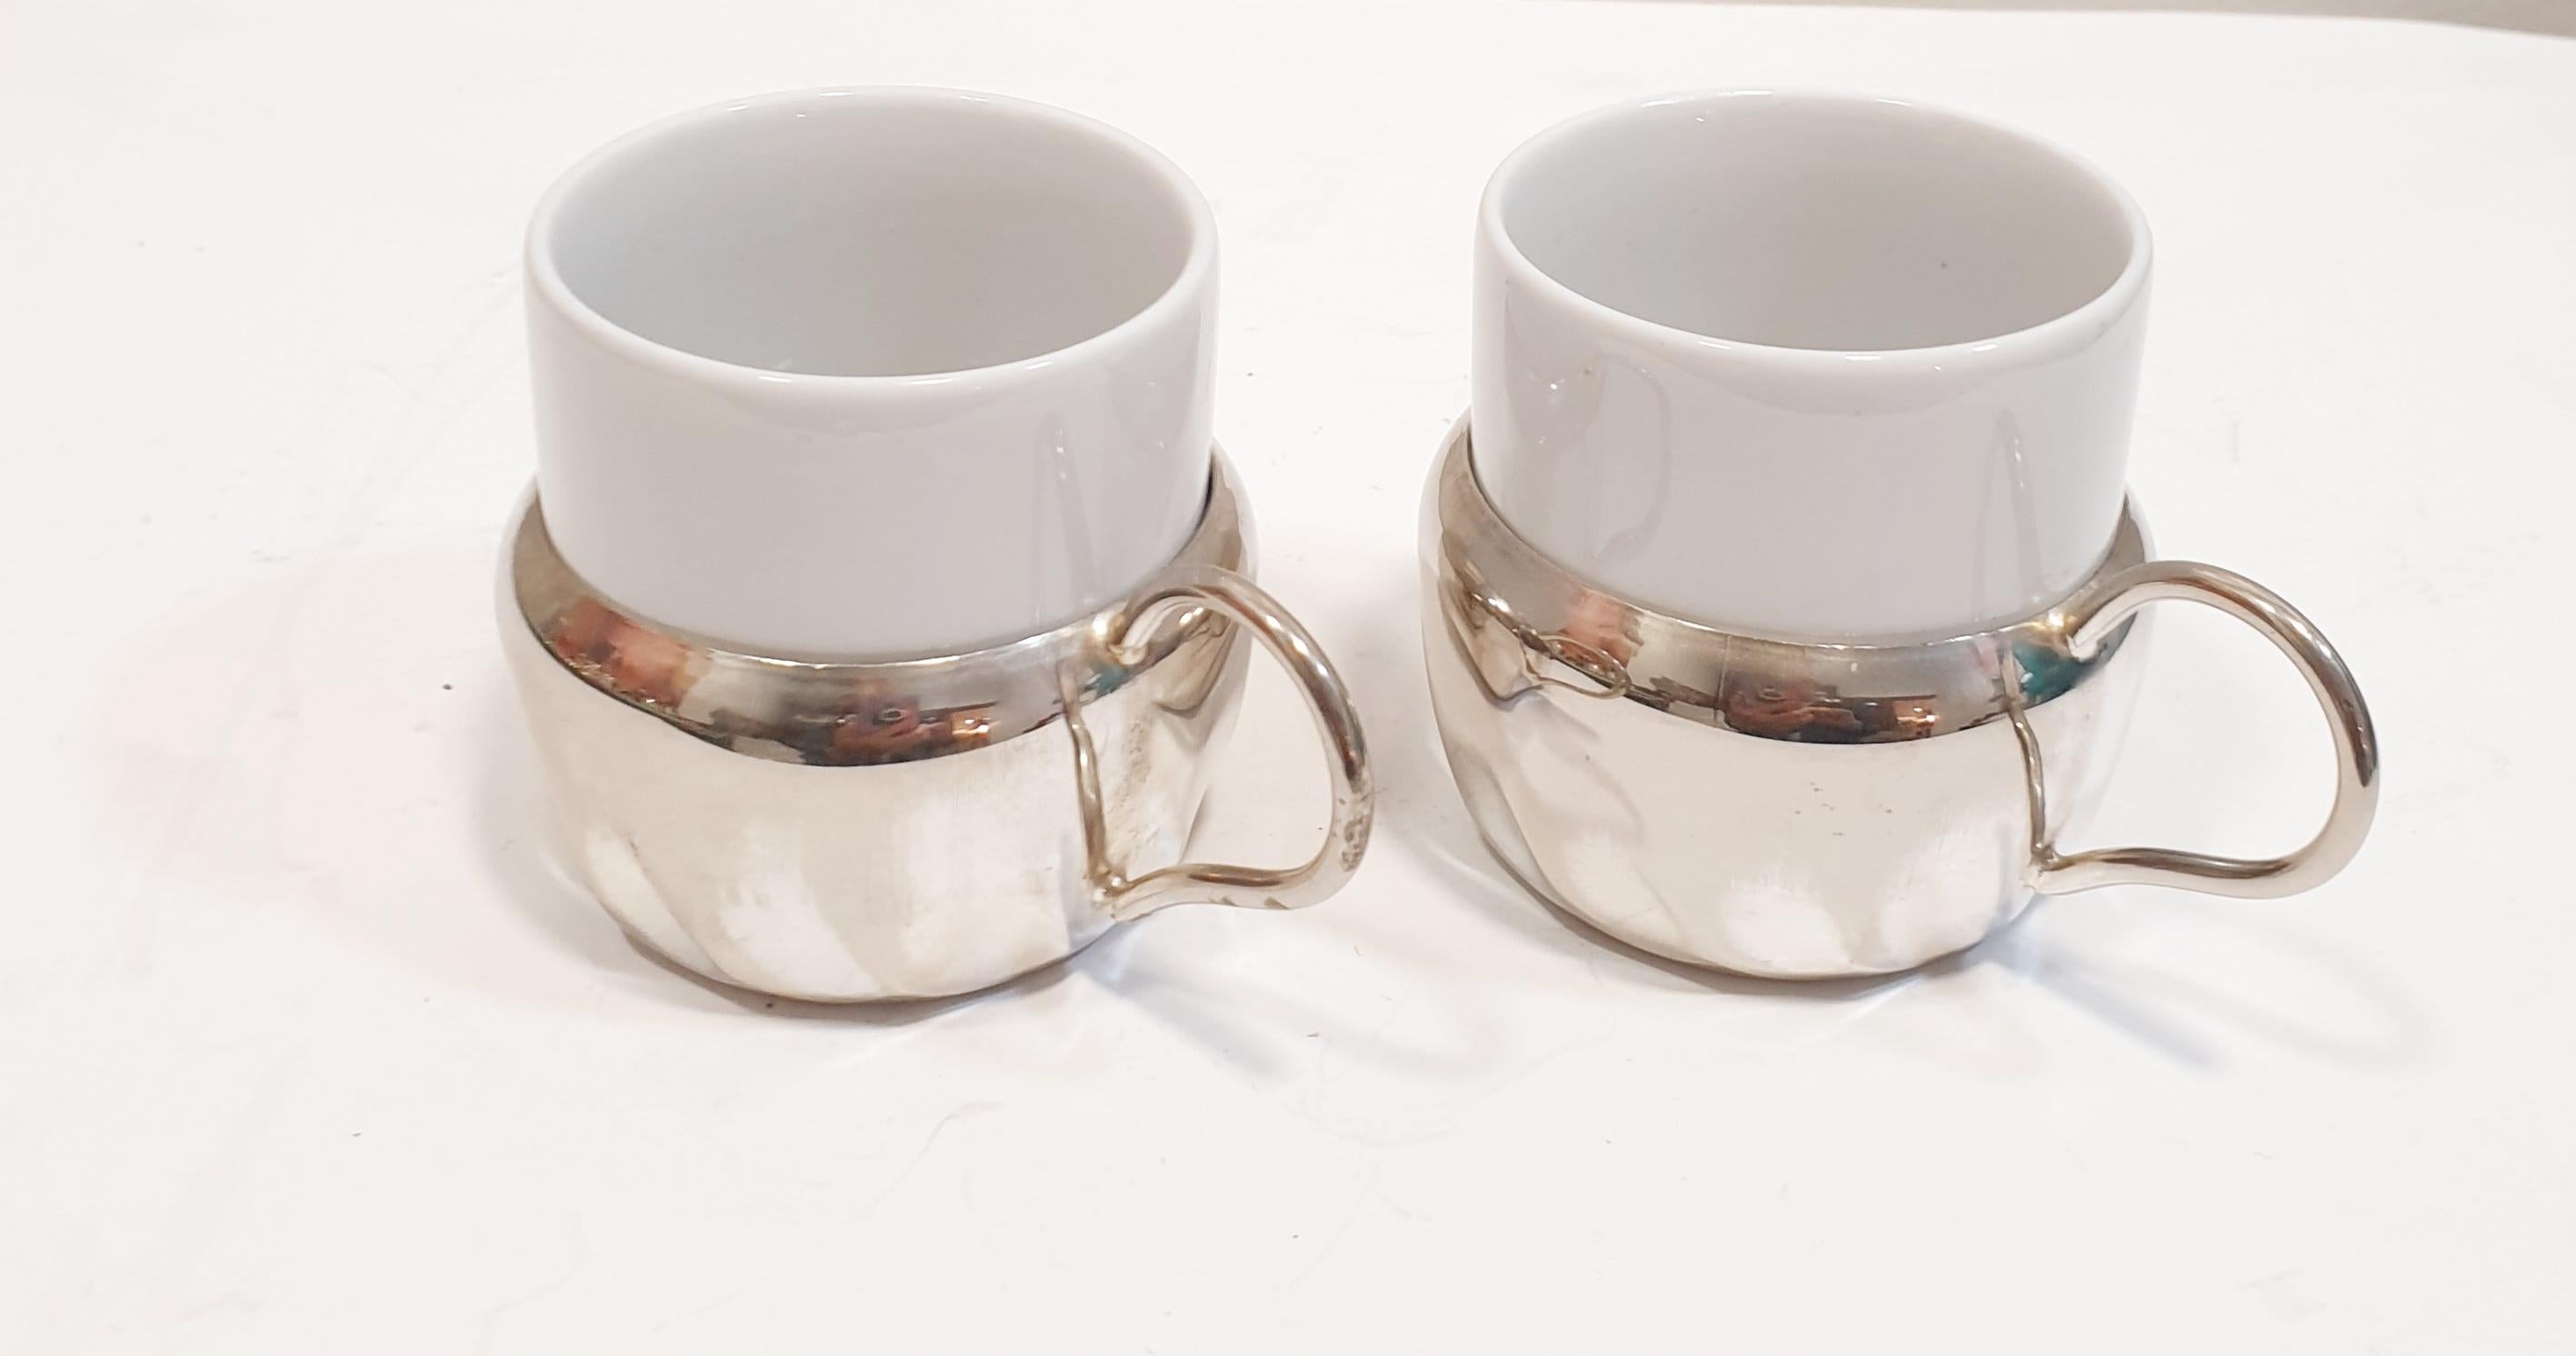 Antique silver holders with built-in vessels from the 19th century
Ideal for some poached eggs for breakfast

PRADERA is a second generation of a family run business jewelers of reference in Spain, with a rich track record being official